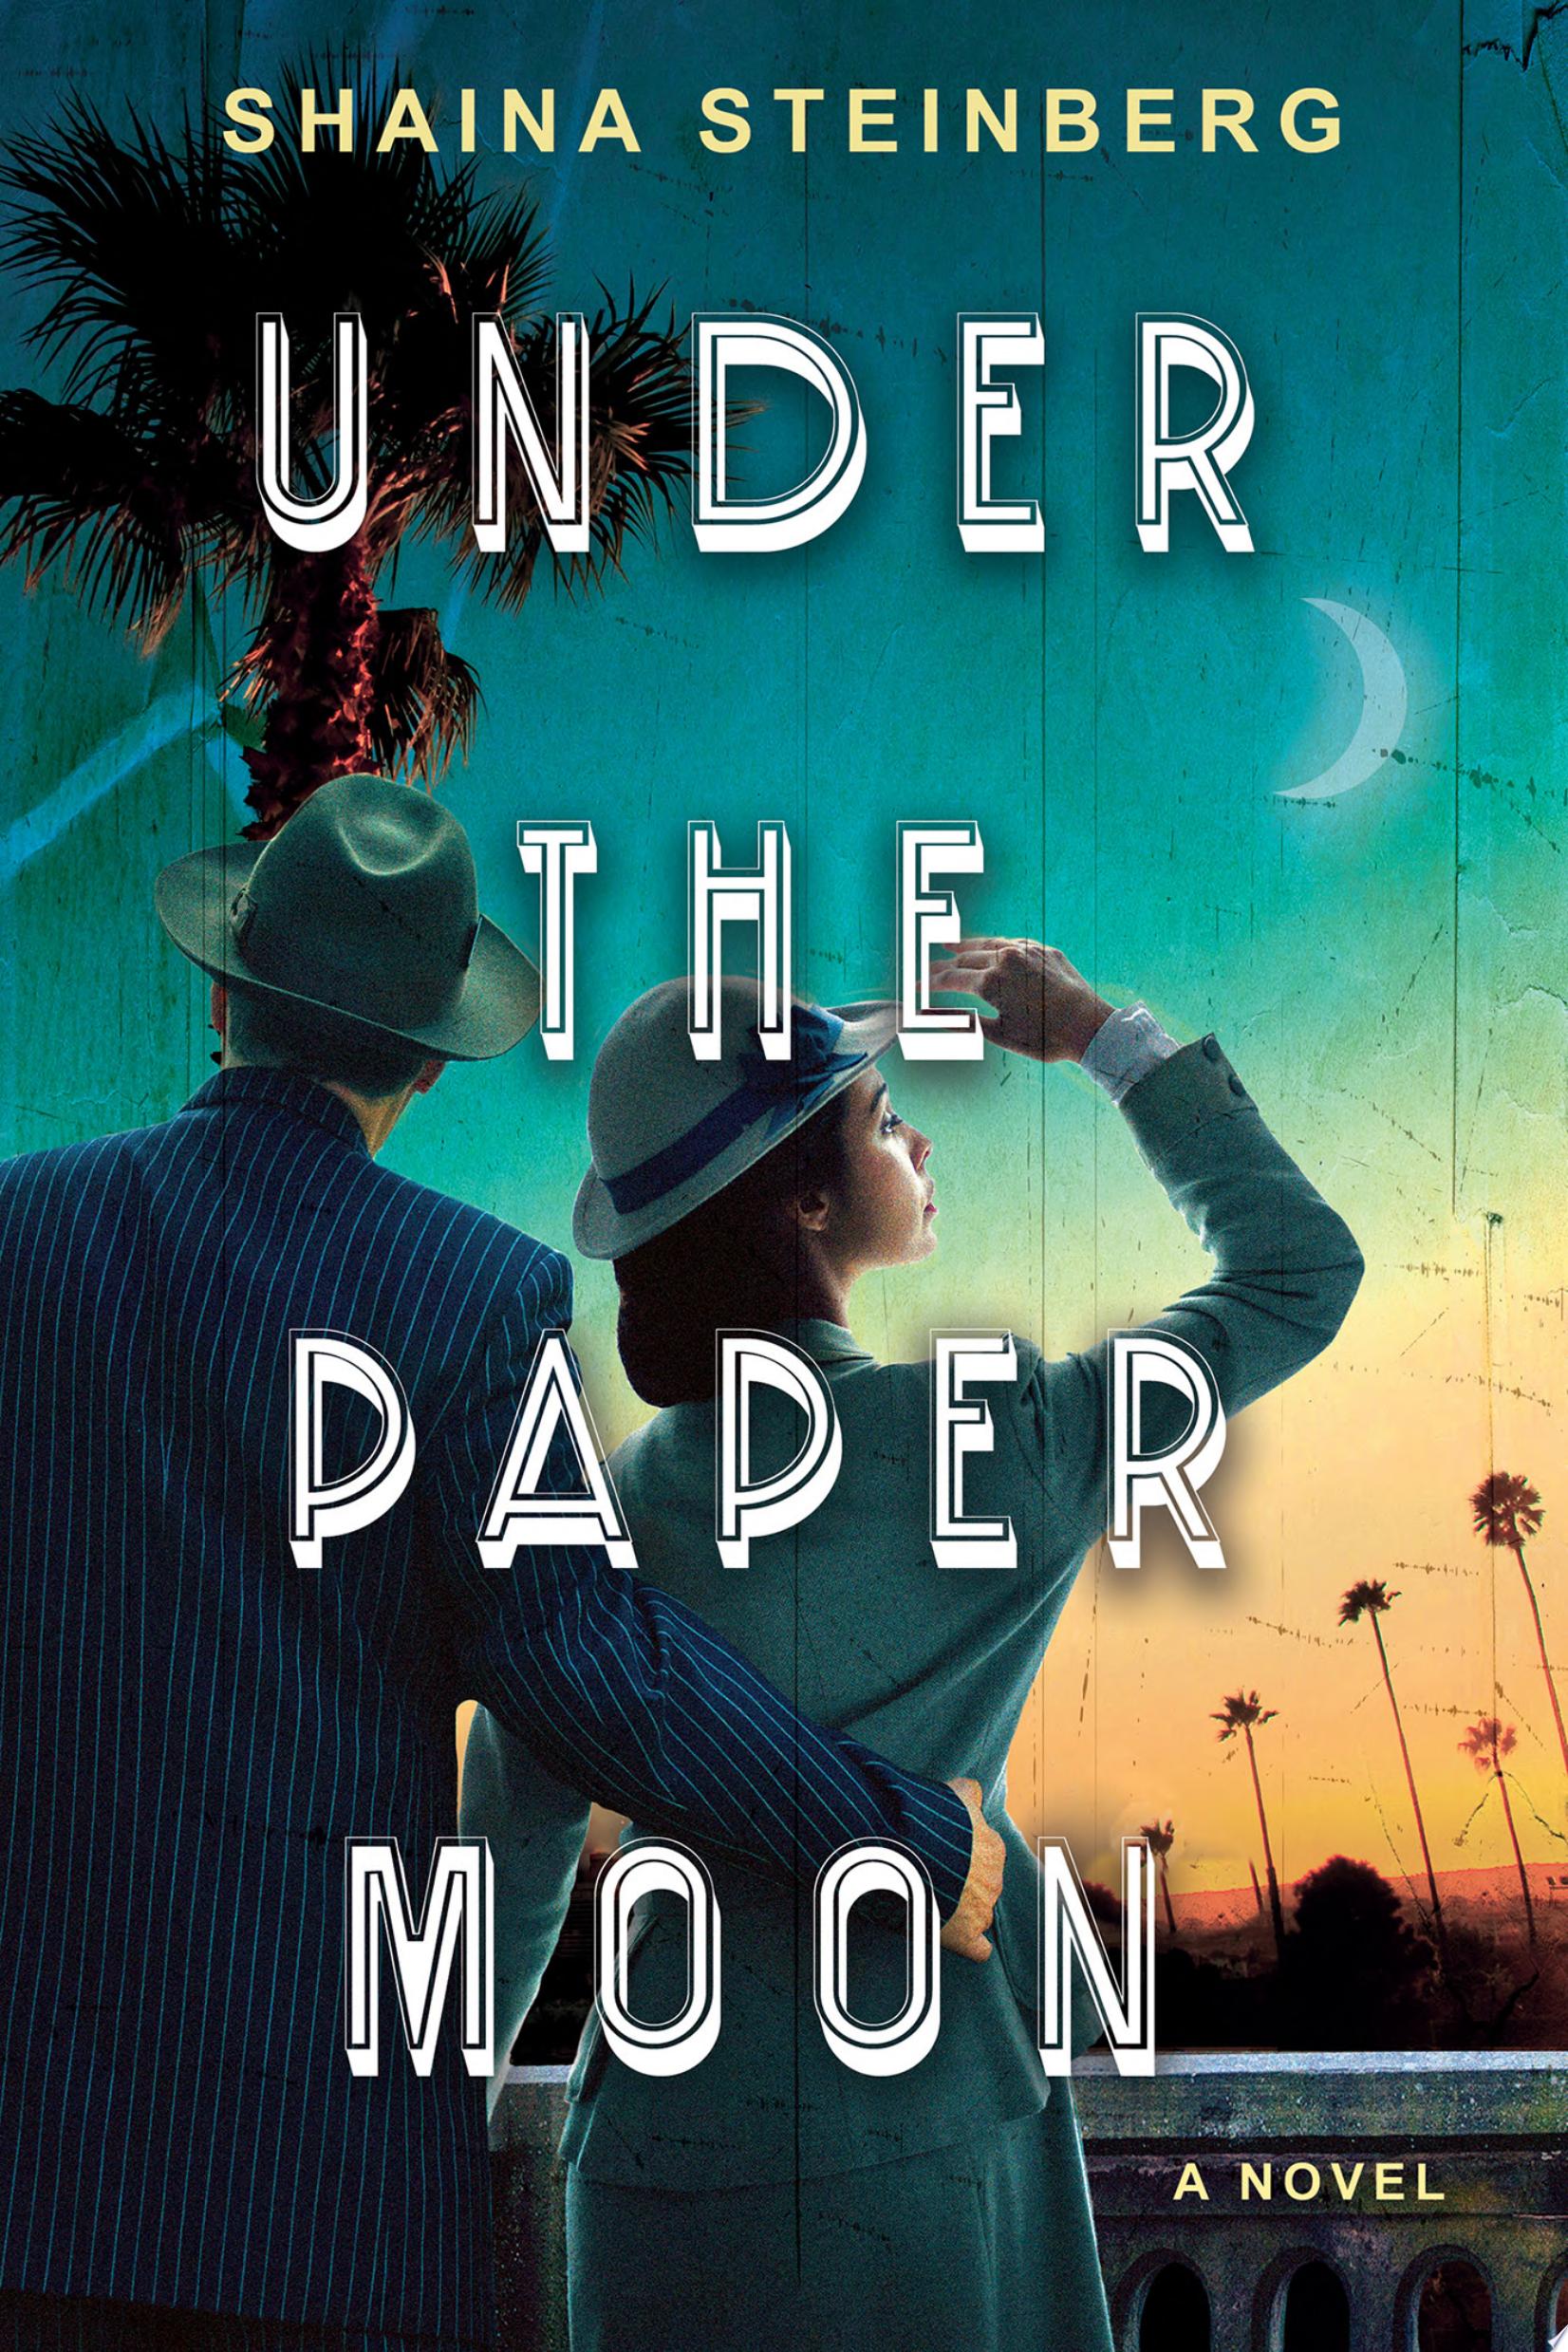 Image for "Under the Paper Moon"